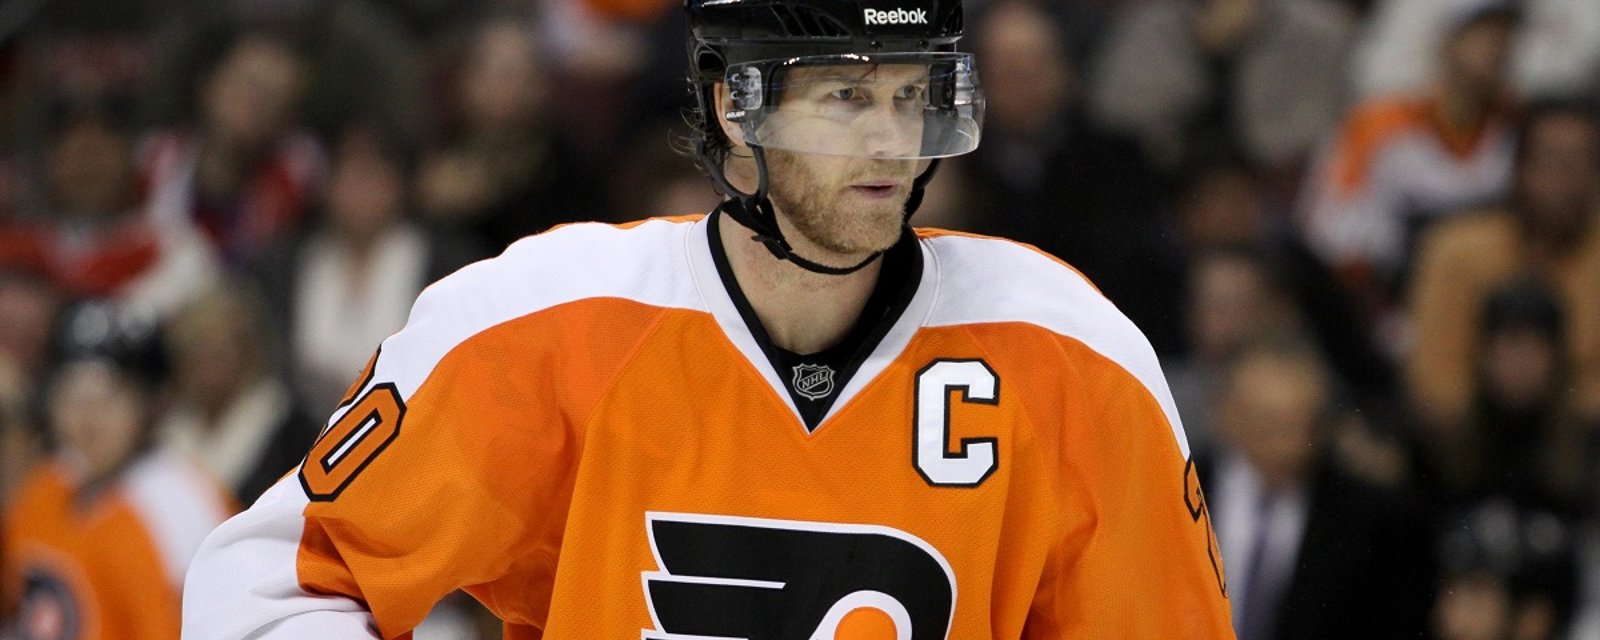 Breaking: Chris Pronger could look to join an NHL team when his contract expires this month.